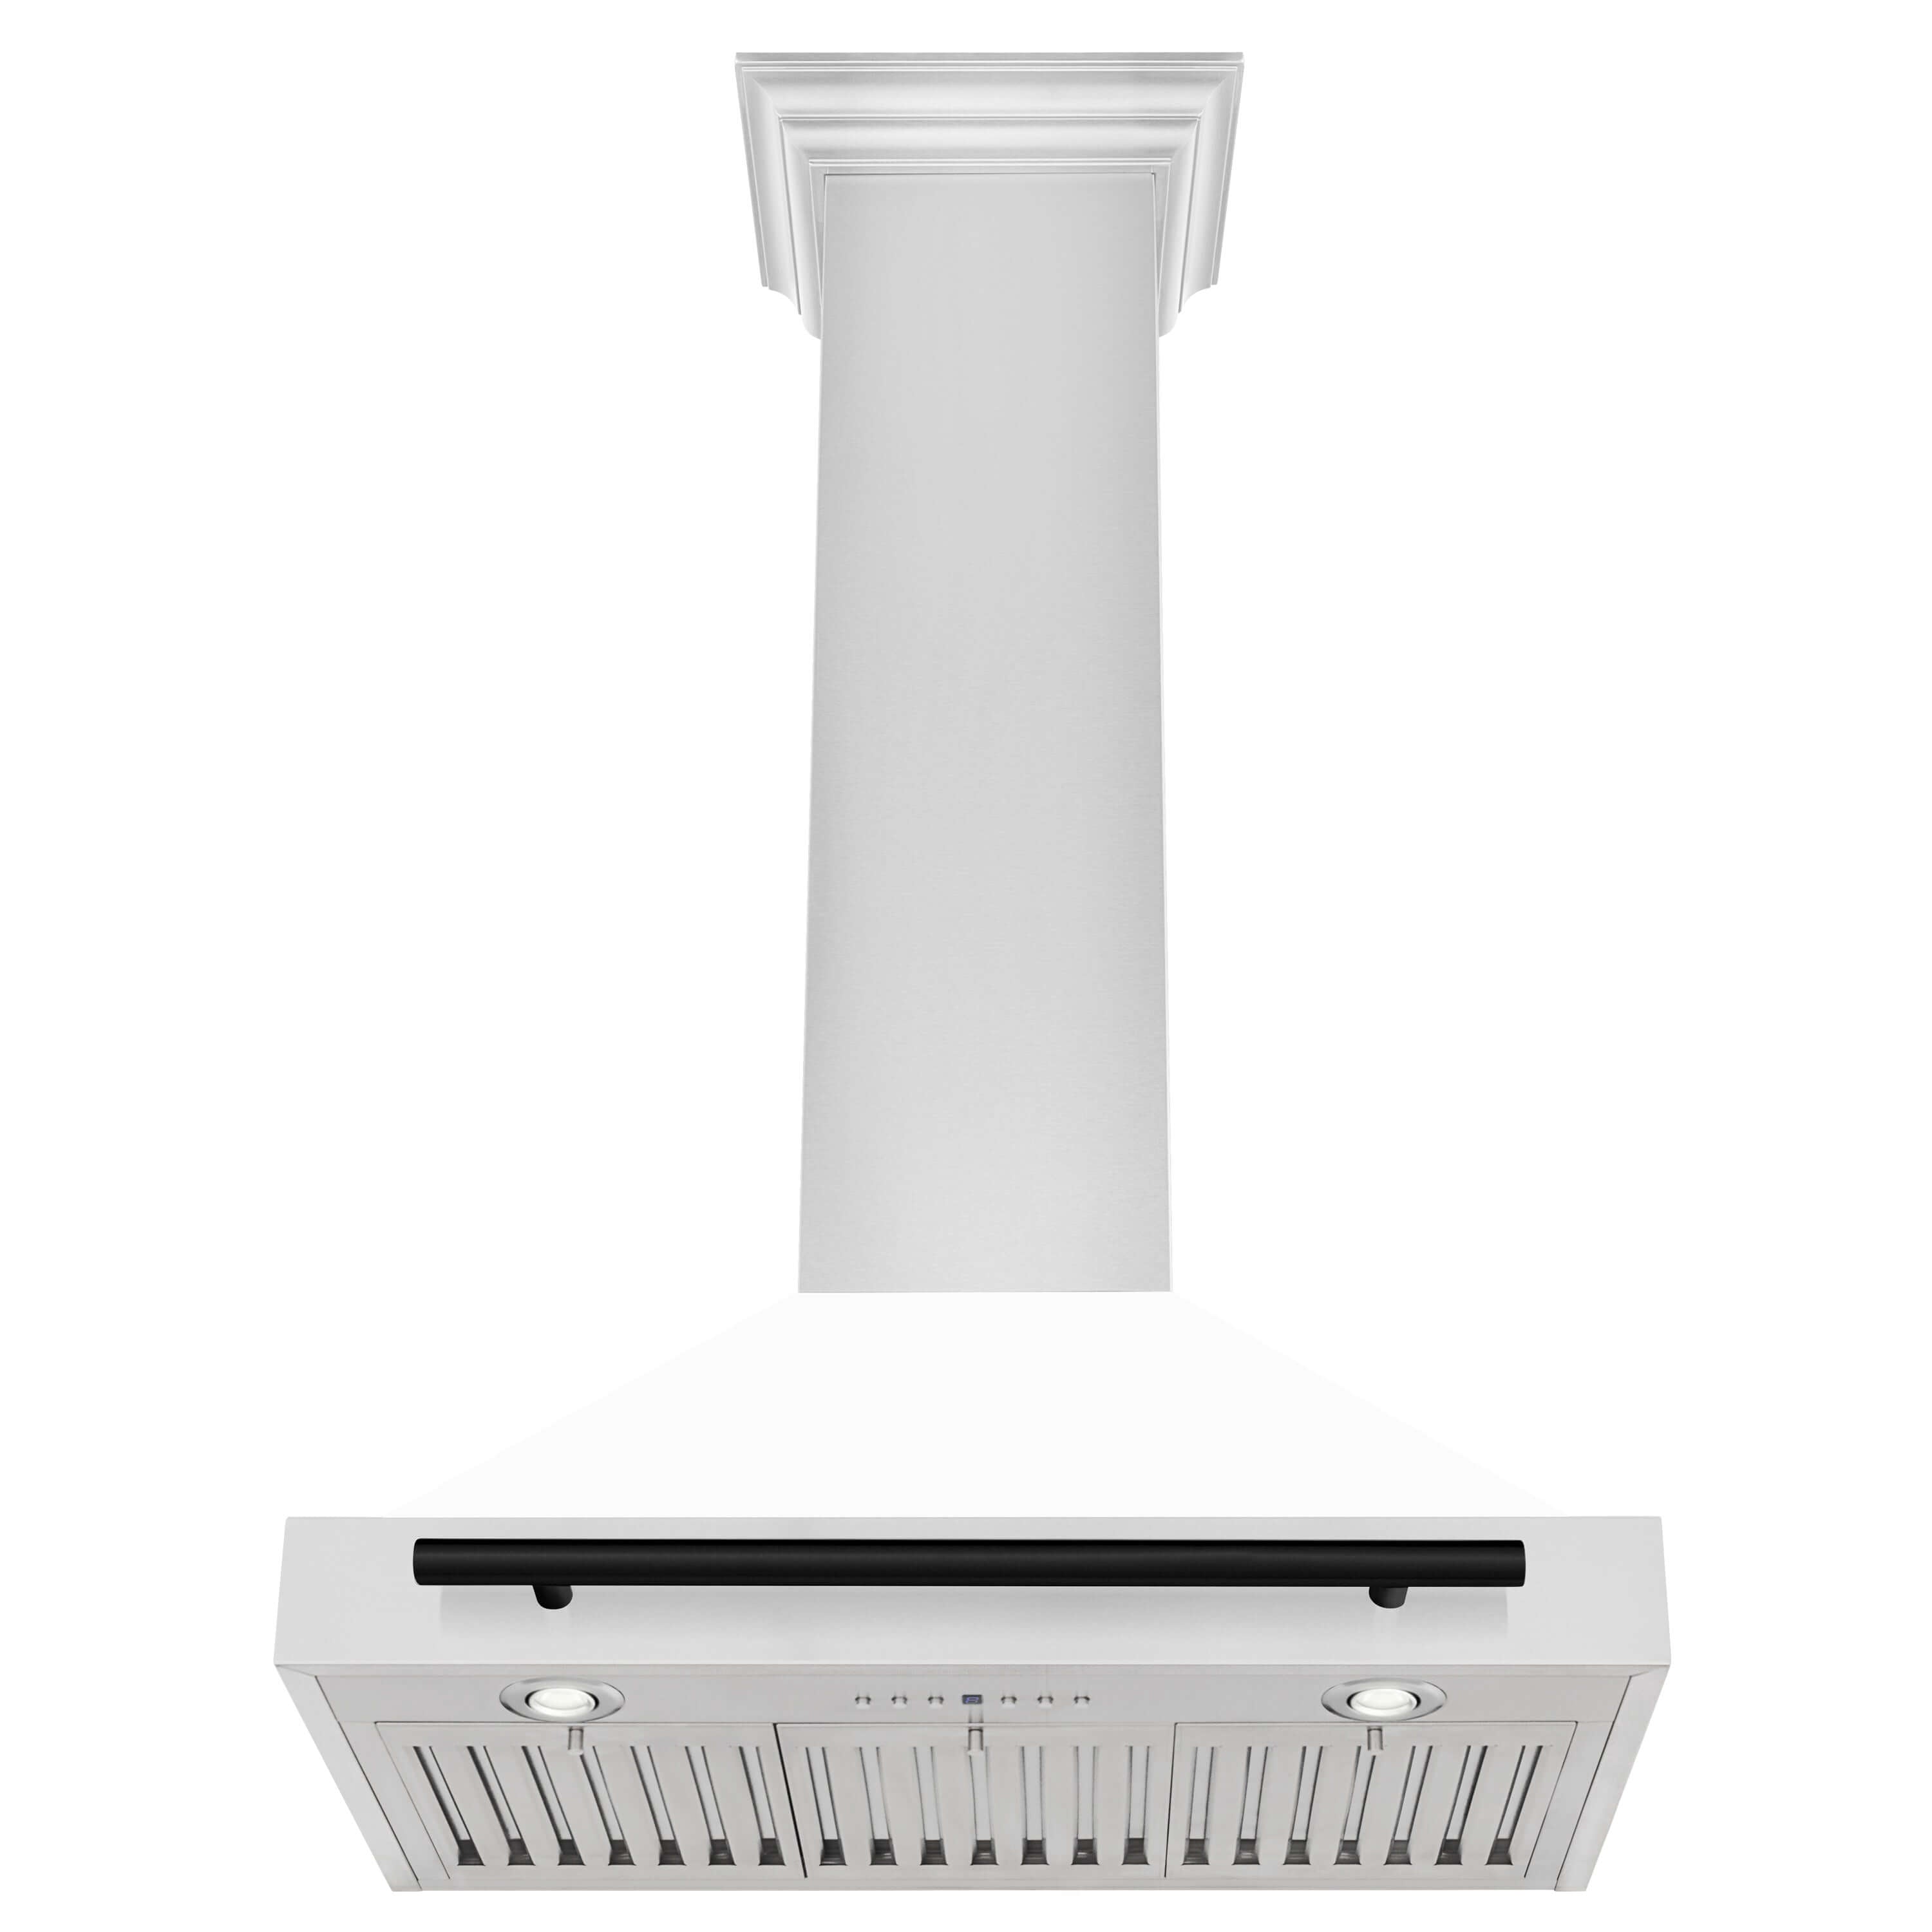 ZLINE 30 in. Autograph Edition Stainless Steel Range Hood with White Matte Shell with Matte Black Accents (KB4STZ-WM30) Under View